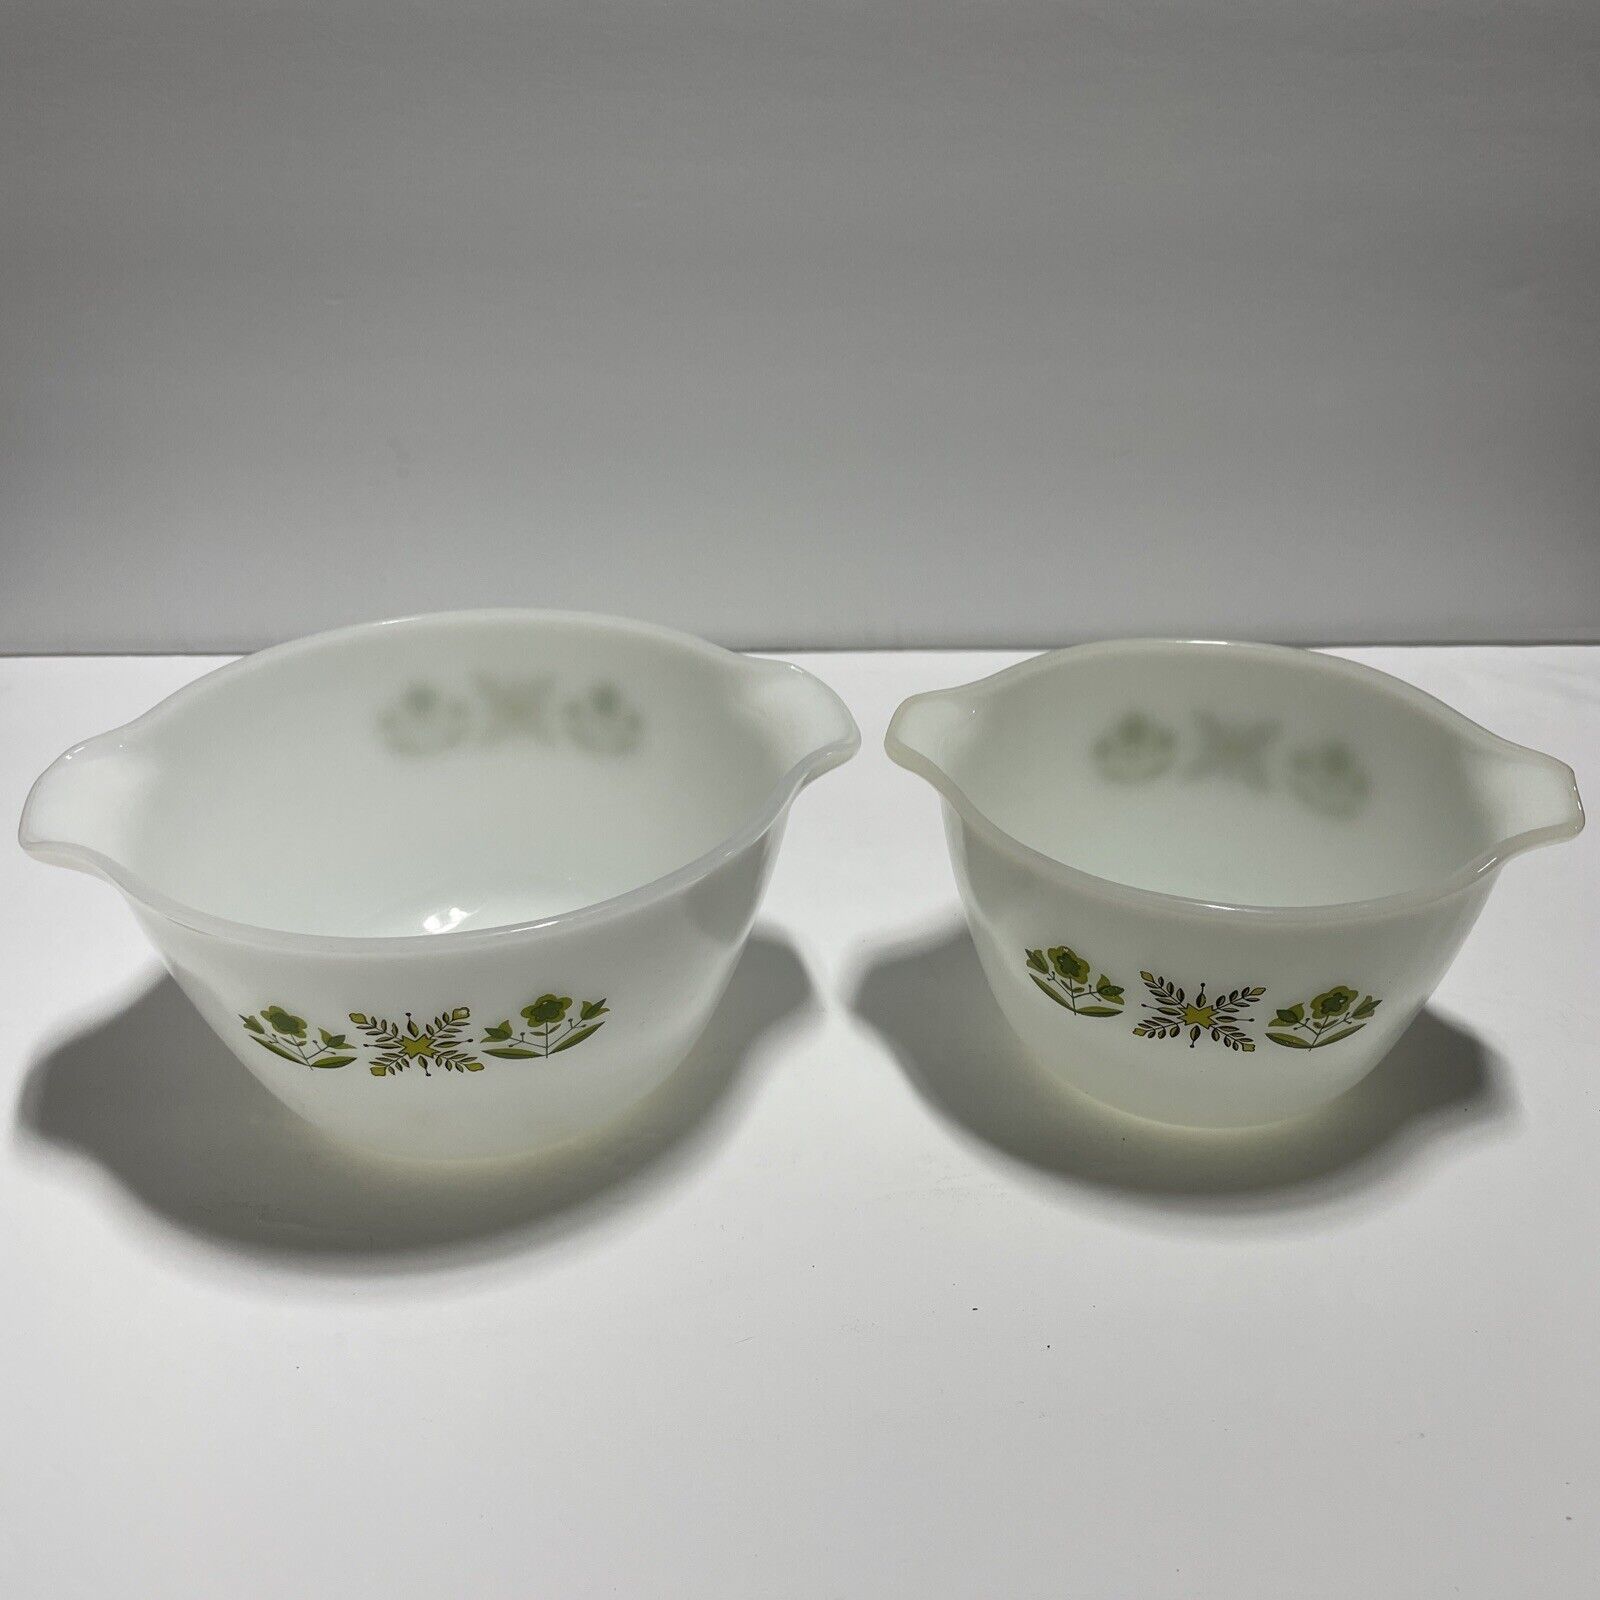 Vintage Anchor Hocking Fire King Nesting Mixing Bowls Meadow Green Set Of 2